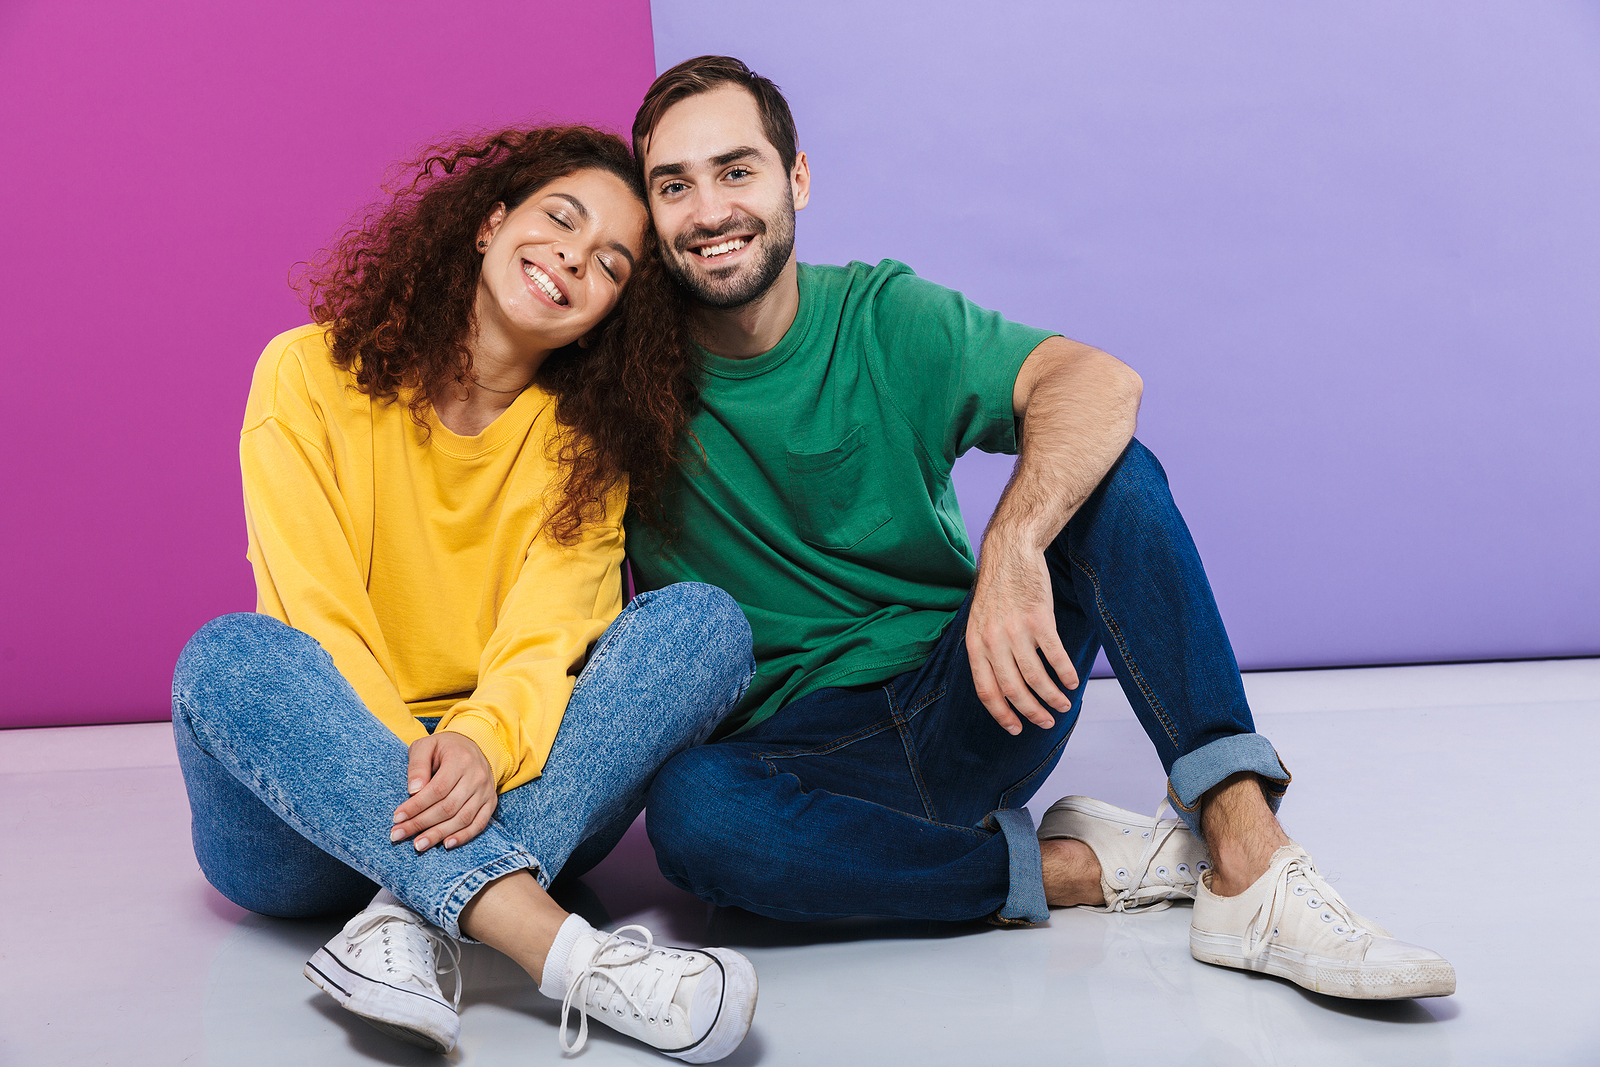 Portrait of young caucasian couple in colorful clothing smiling and hugging together while sitting on floor isolated over violet background